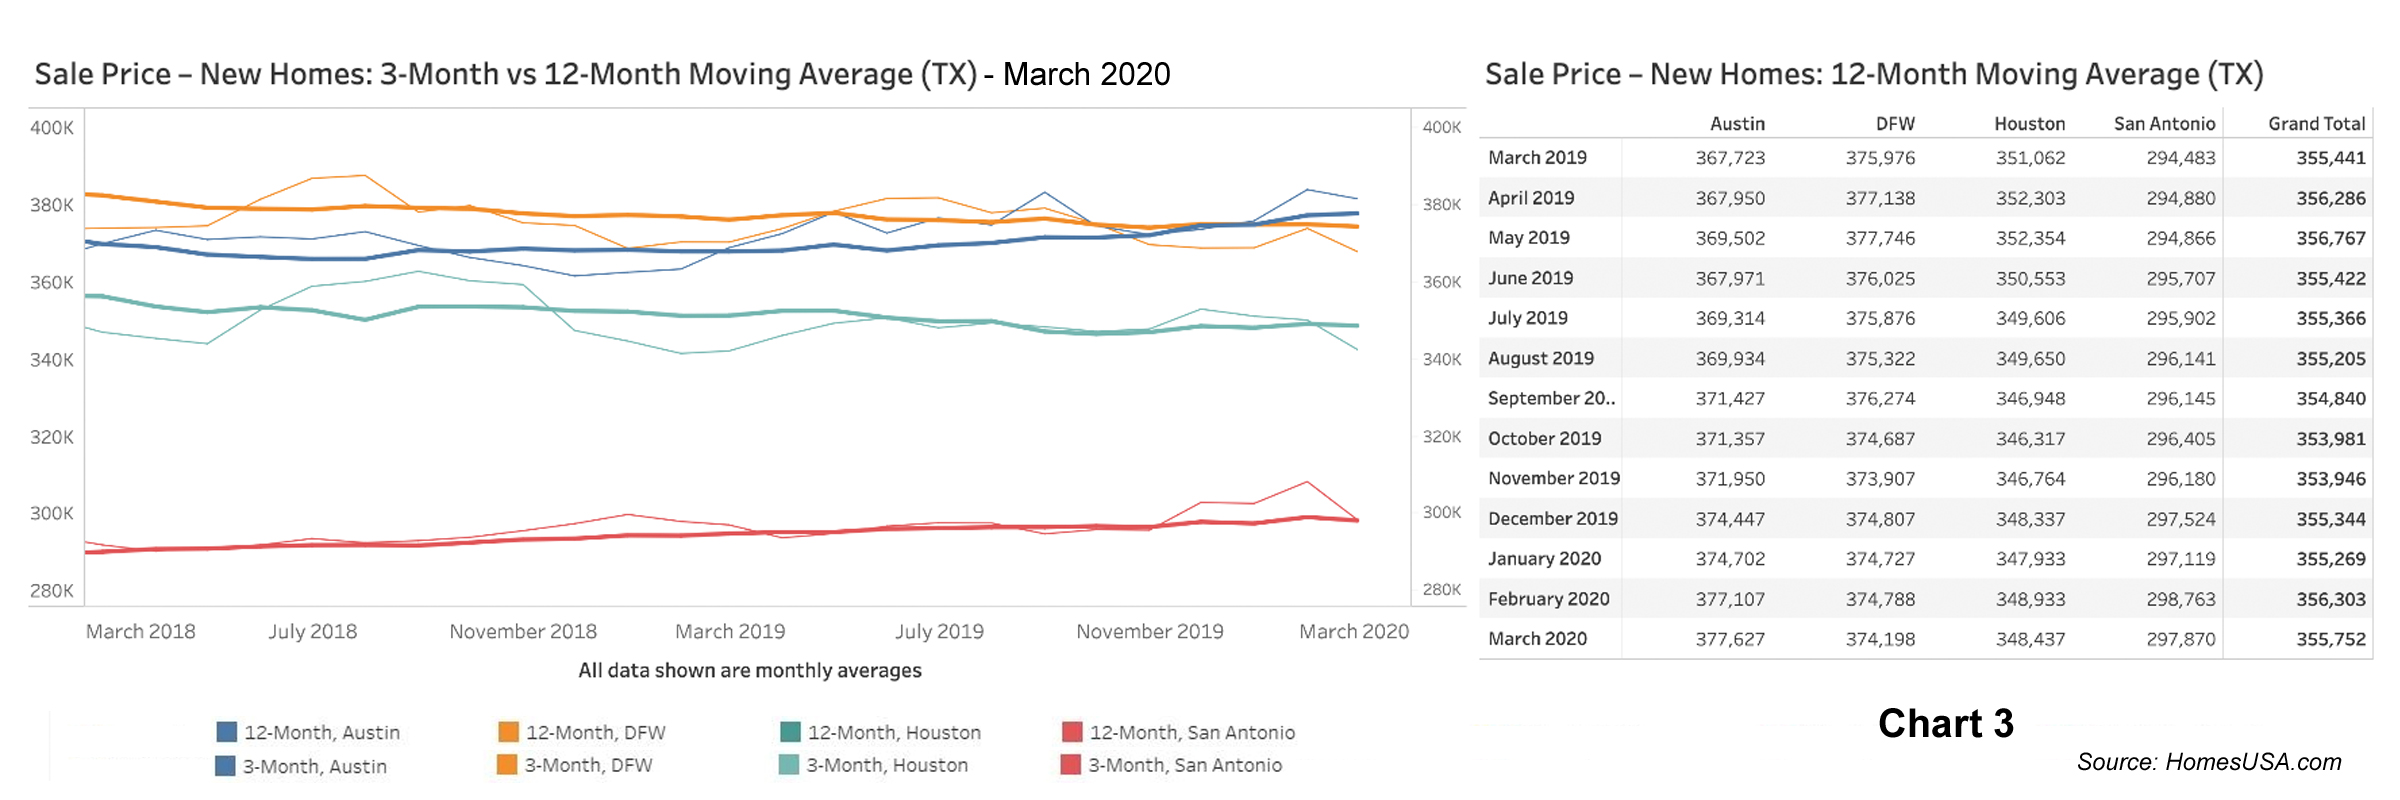  Chart 3: Texas New Home Prices - March 2020